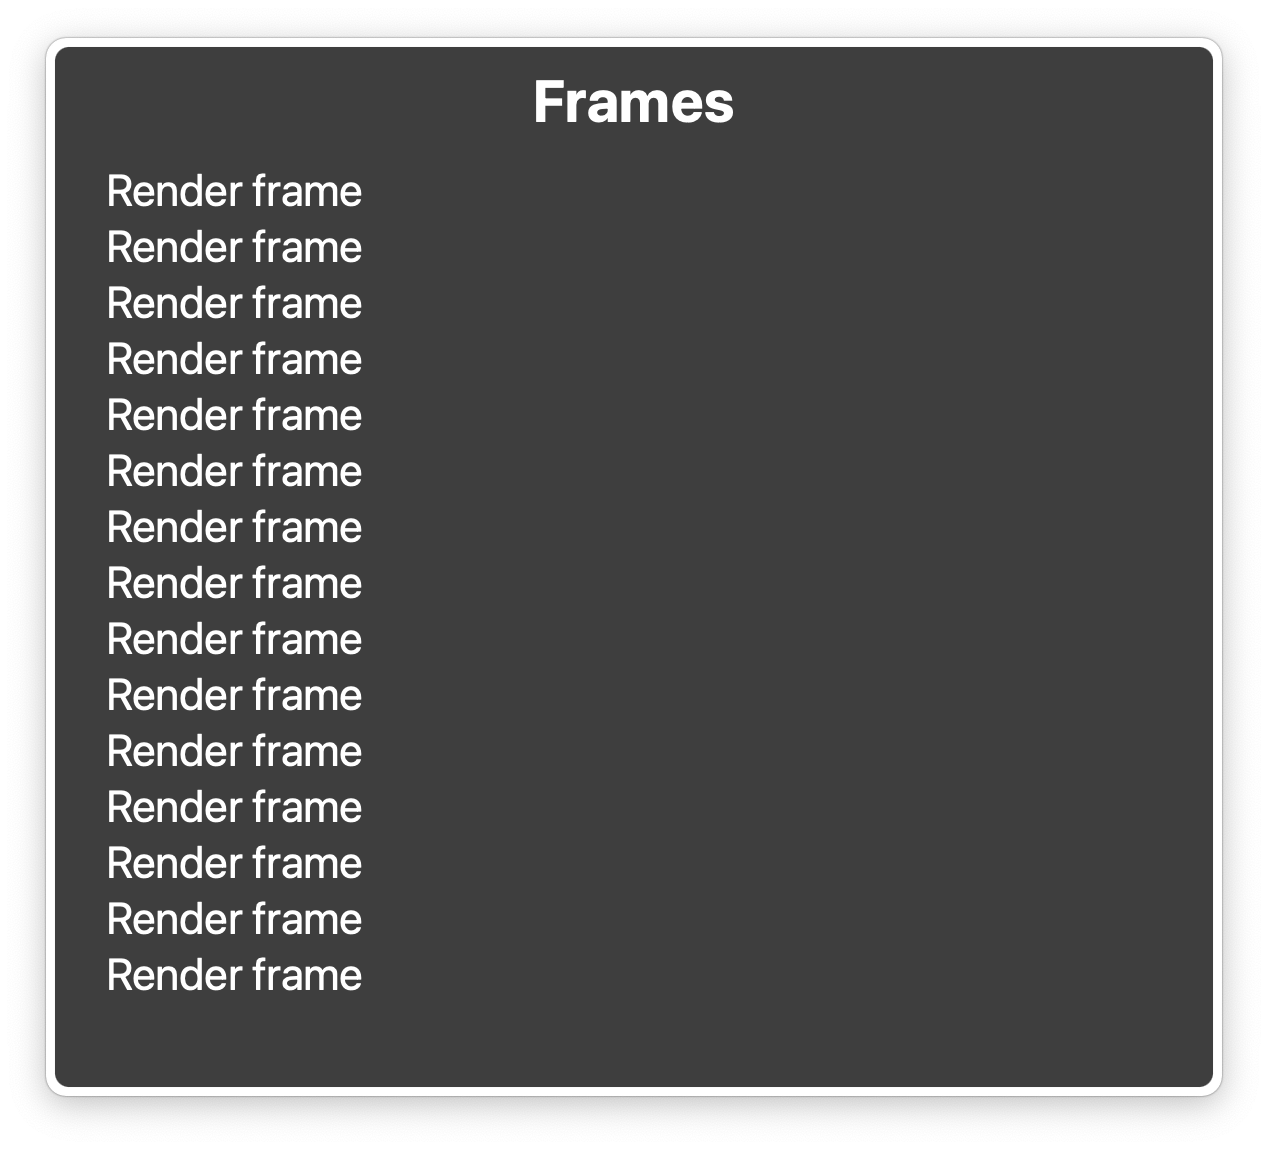 The voiceover rotor lists 15 frames, all of them named "render frame"